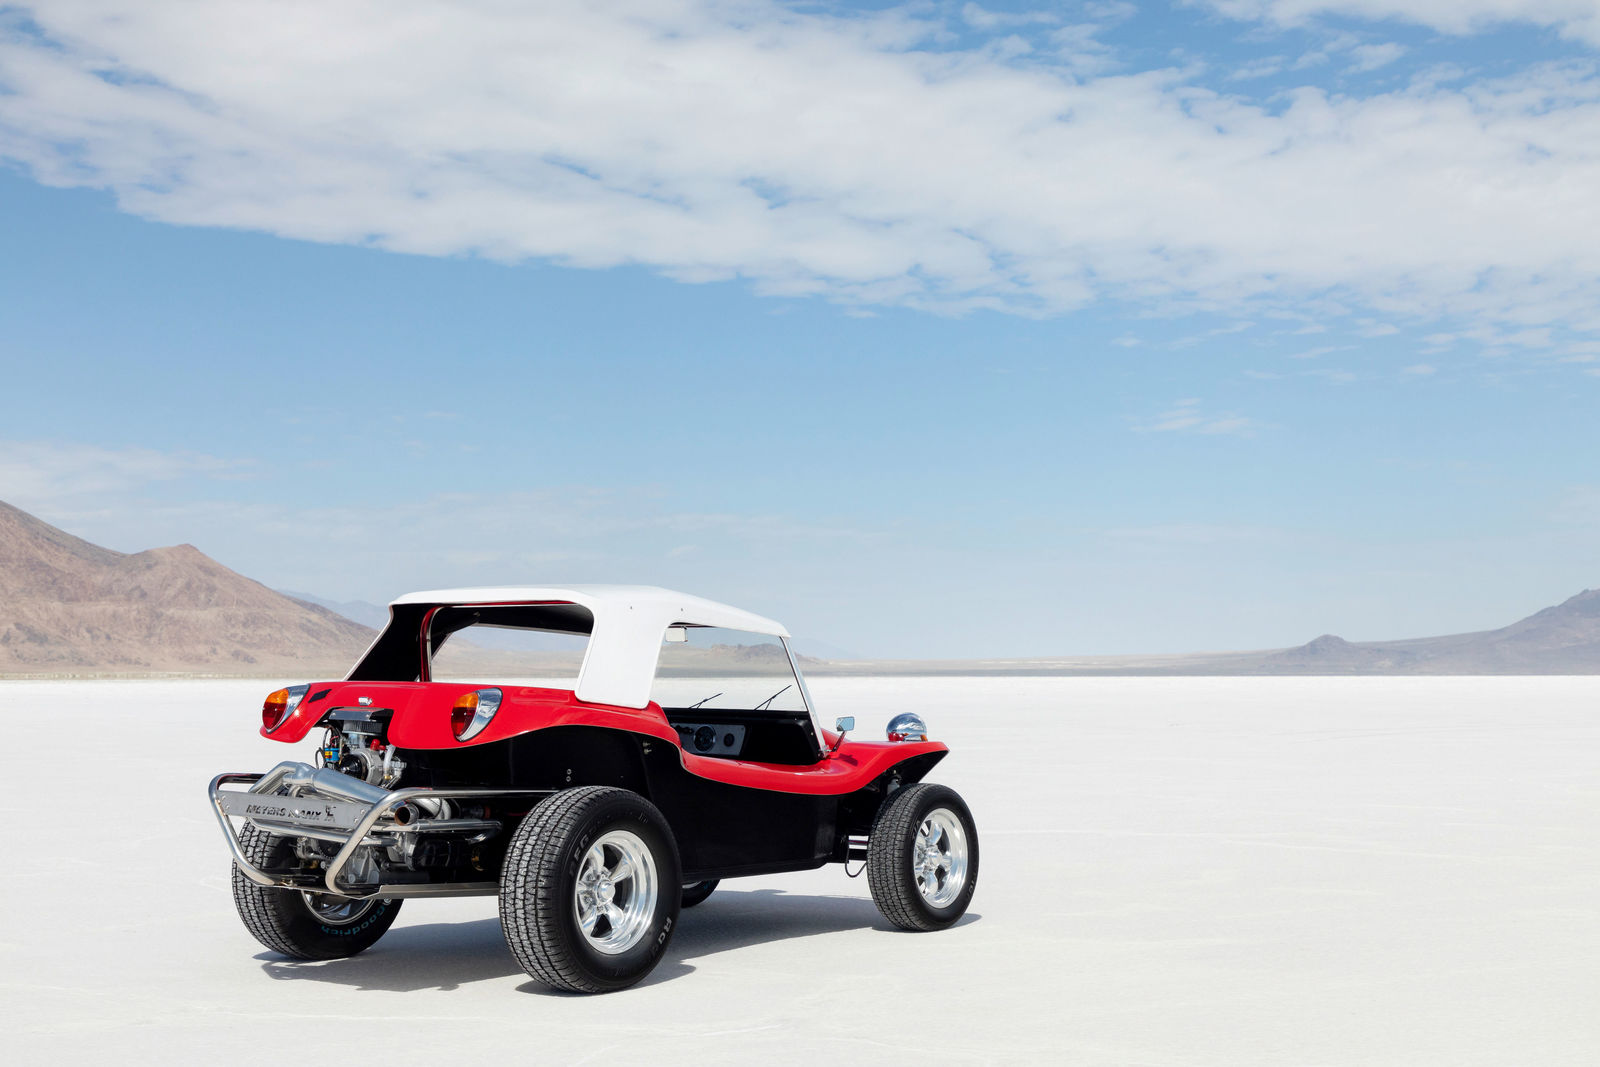 This beach buggy called Meyers Manx has been developed in the 1960s based on a Beetle chassis.